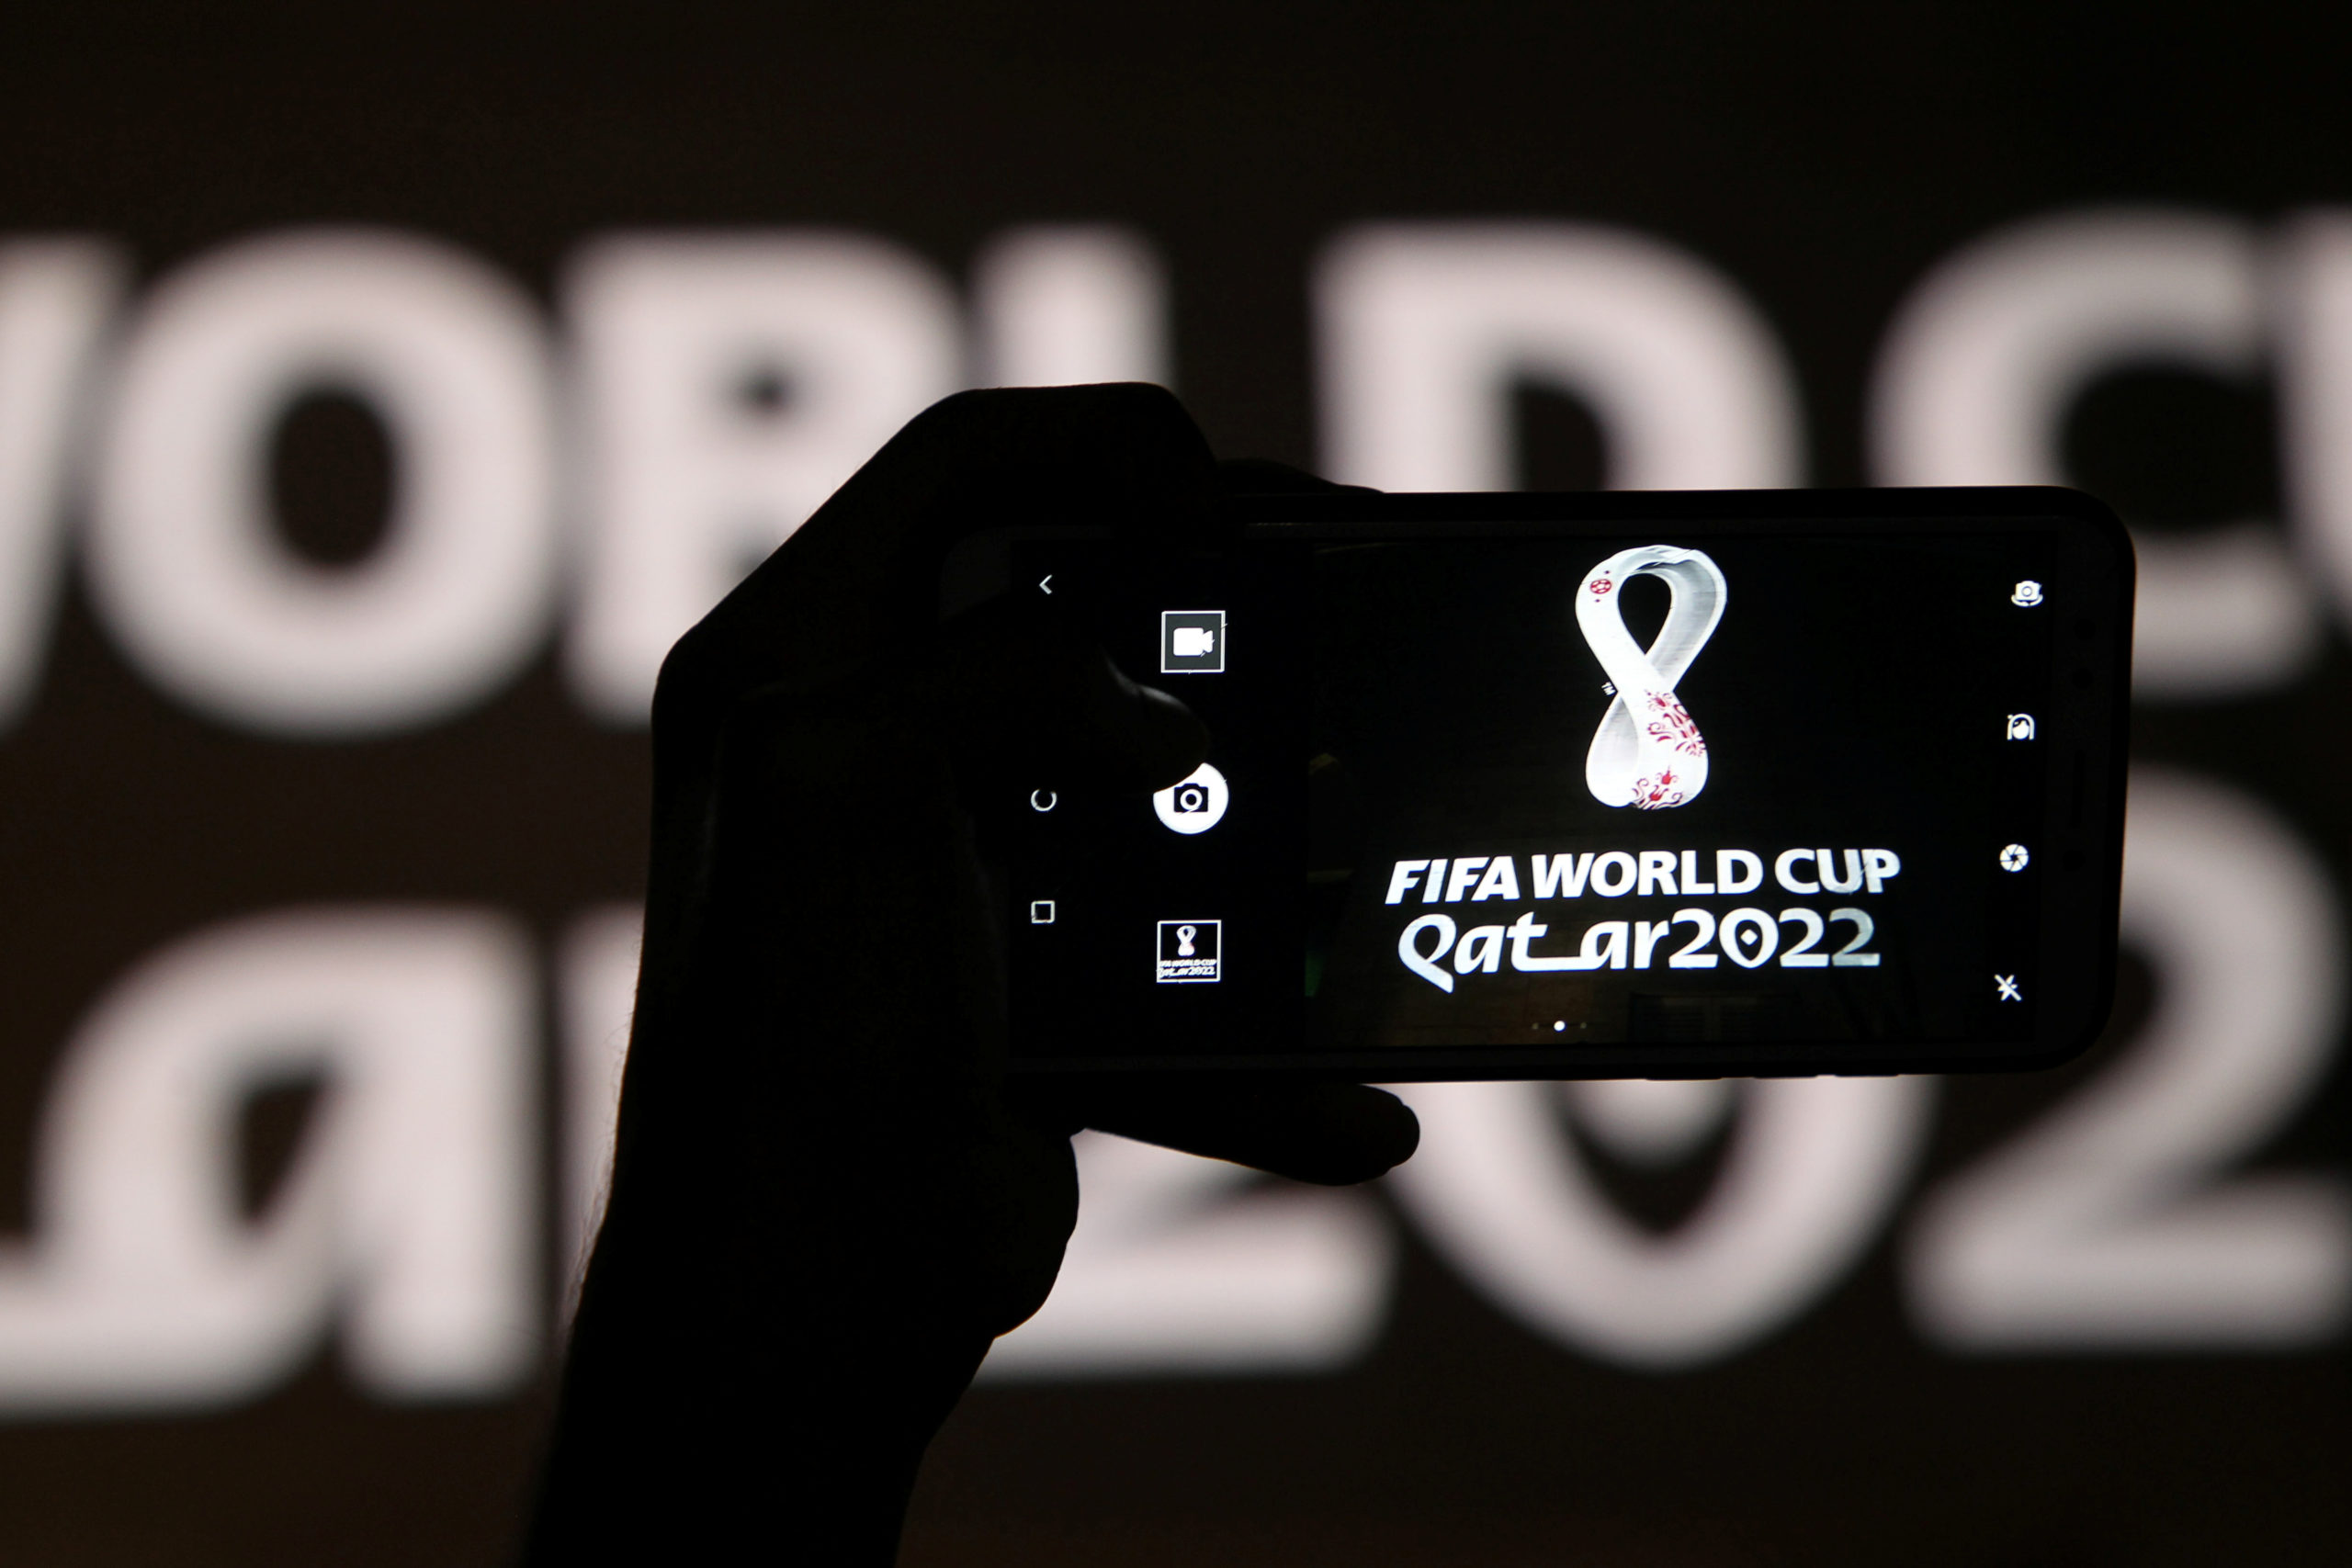 A man takes a picture of the tournament's official logo for the 2022 Qatar World Cup as displayed on the wall of amphitheater, in Doha, Qatar, September 3, 2019.